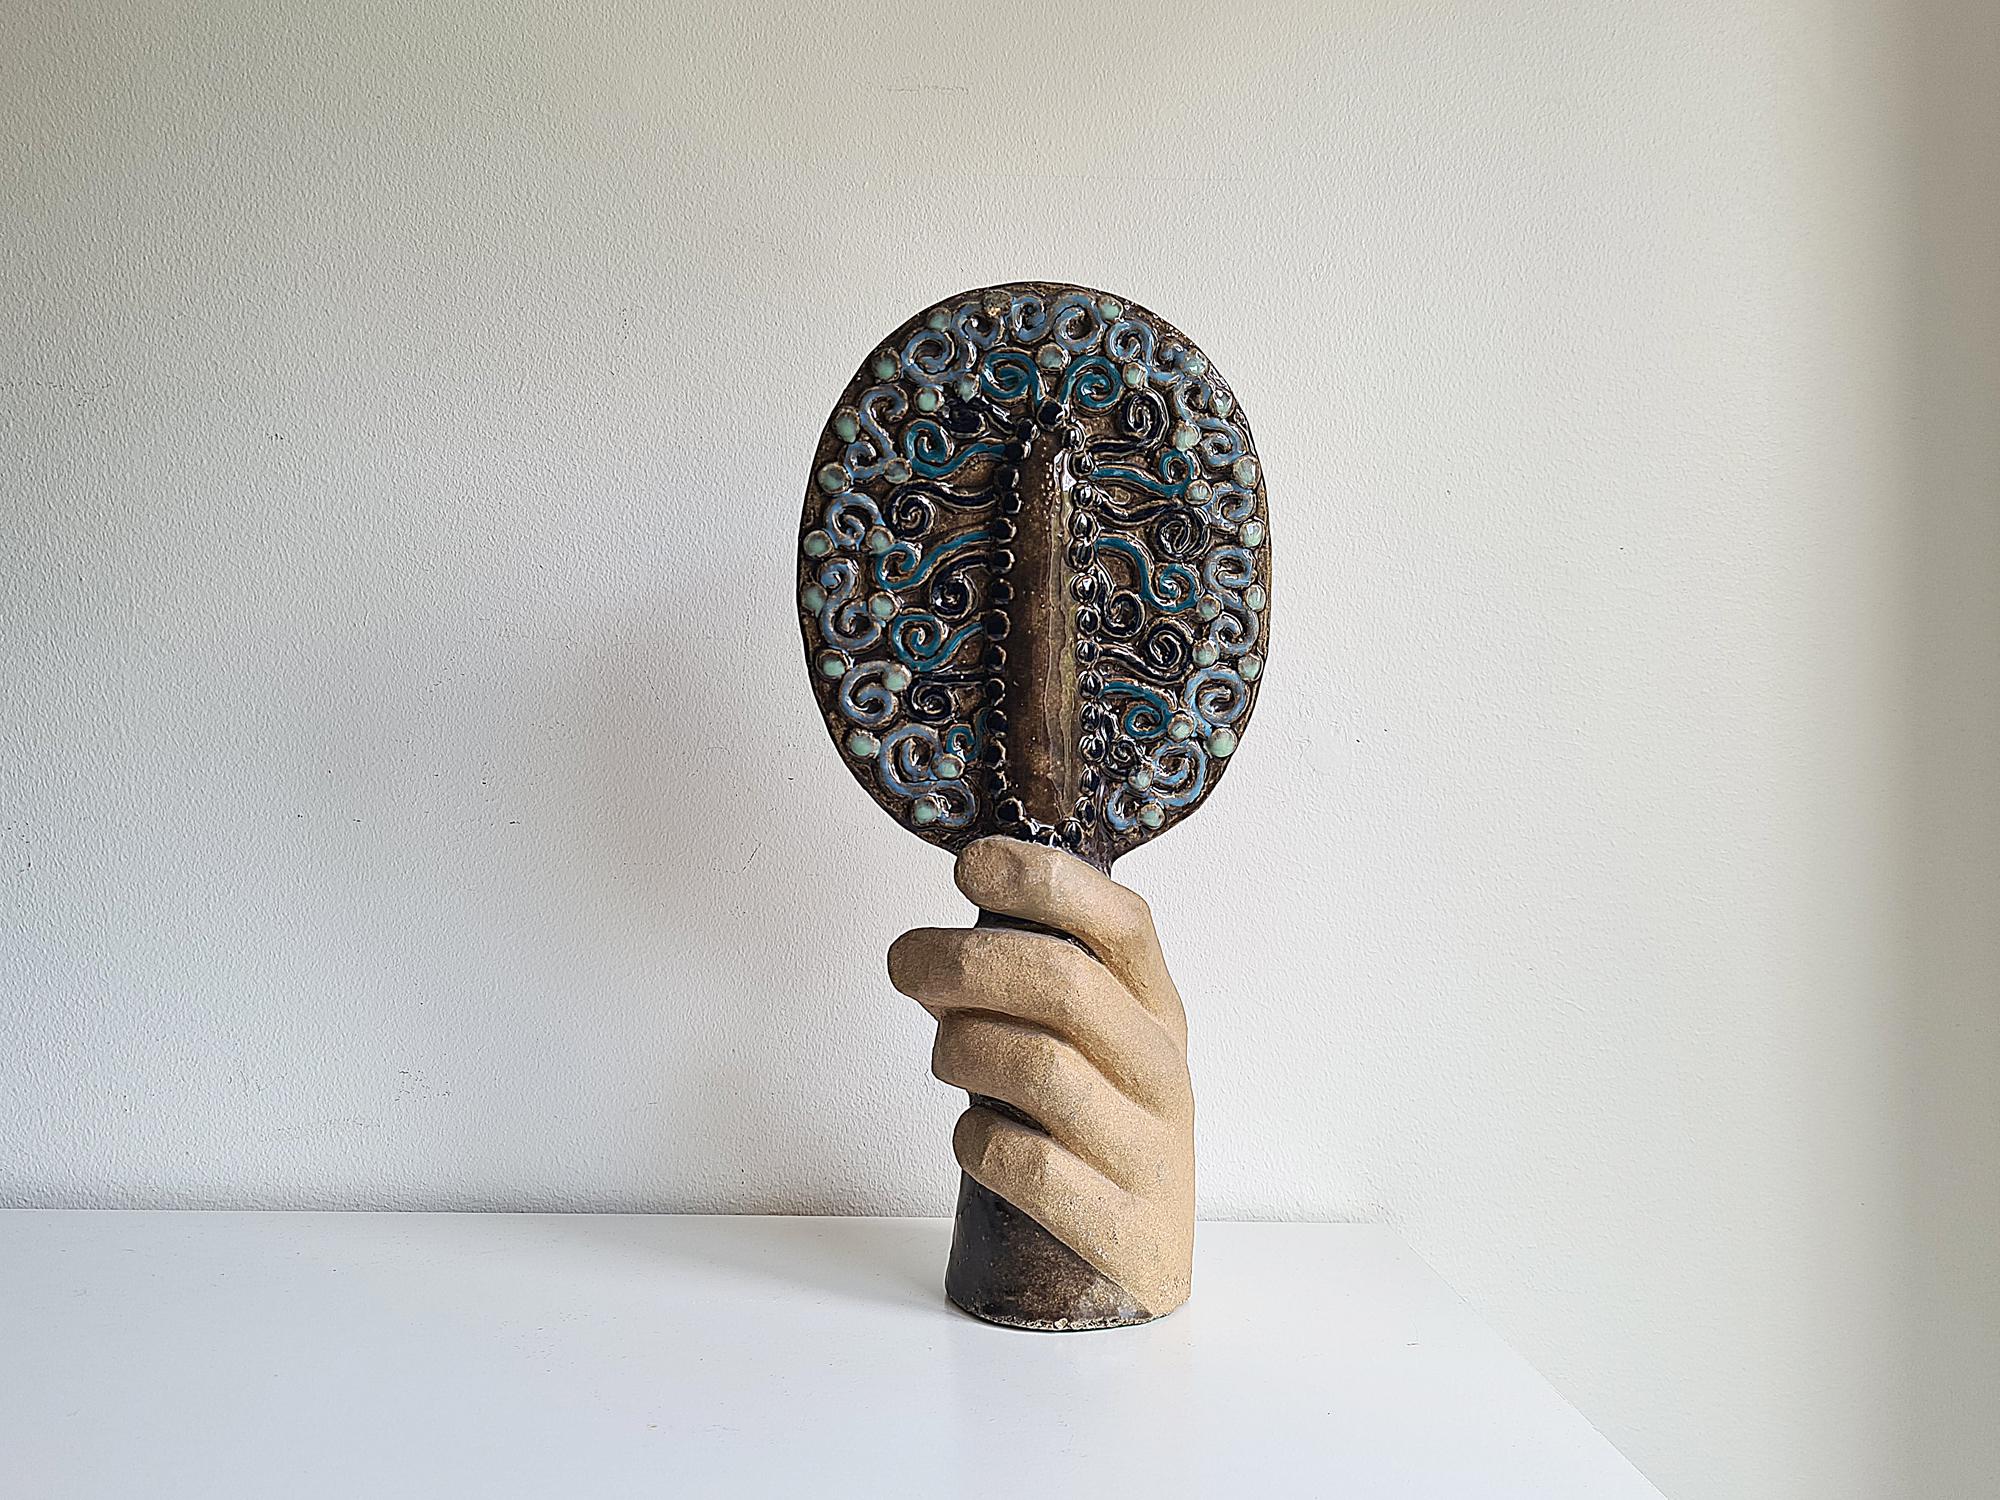 Late 20th Century Swedish Modern Sculptural Mirror by Stig Carlsson 1970s For Sale